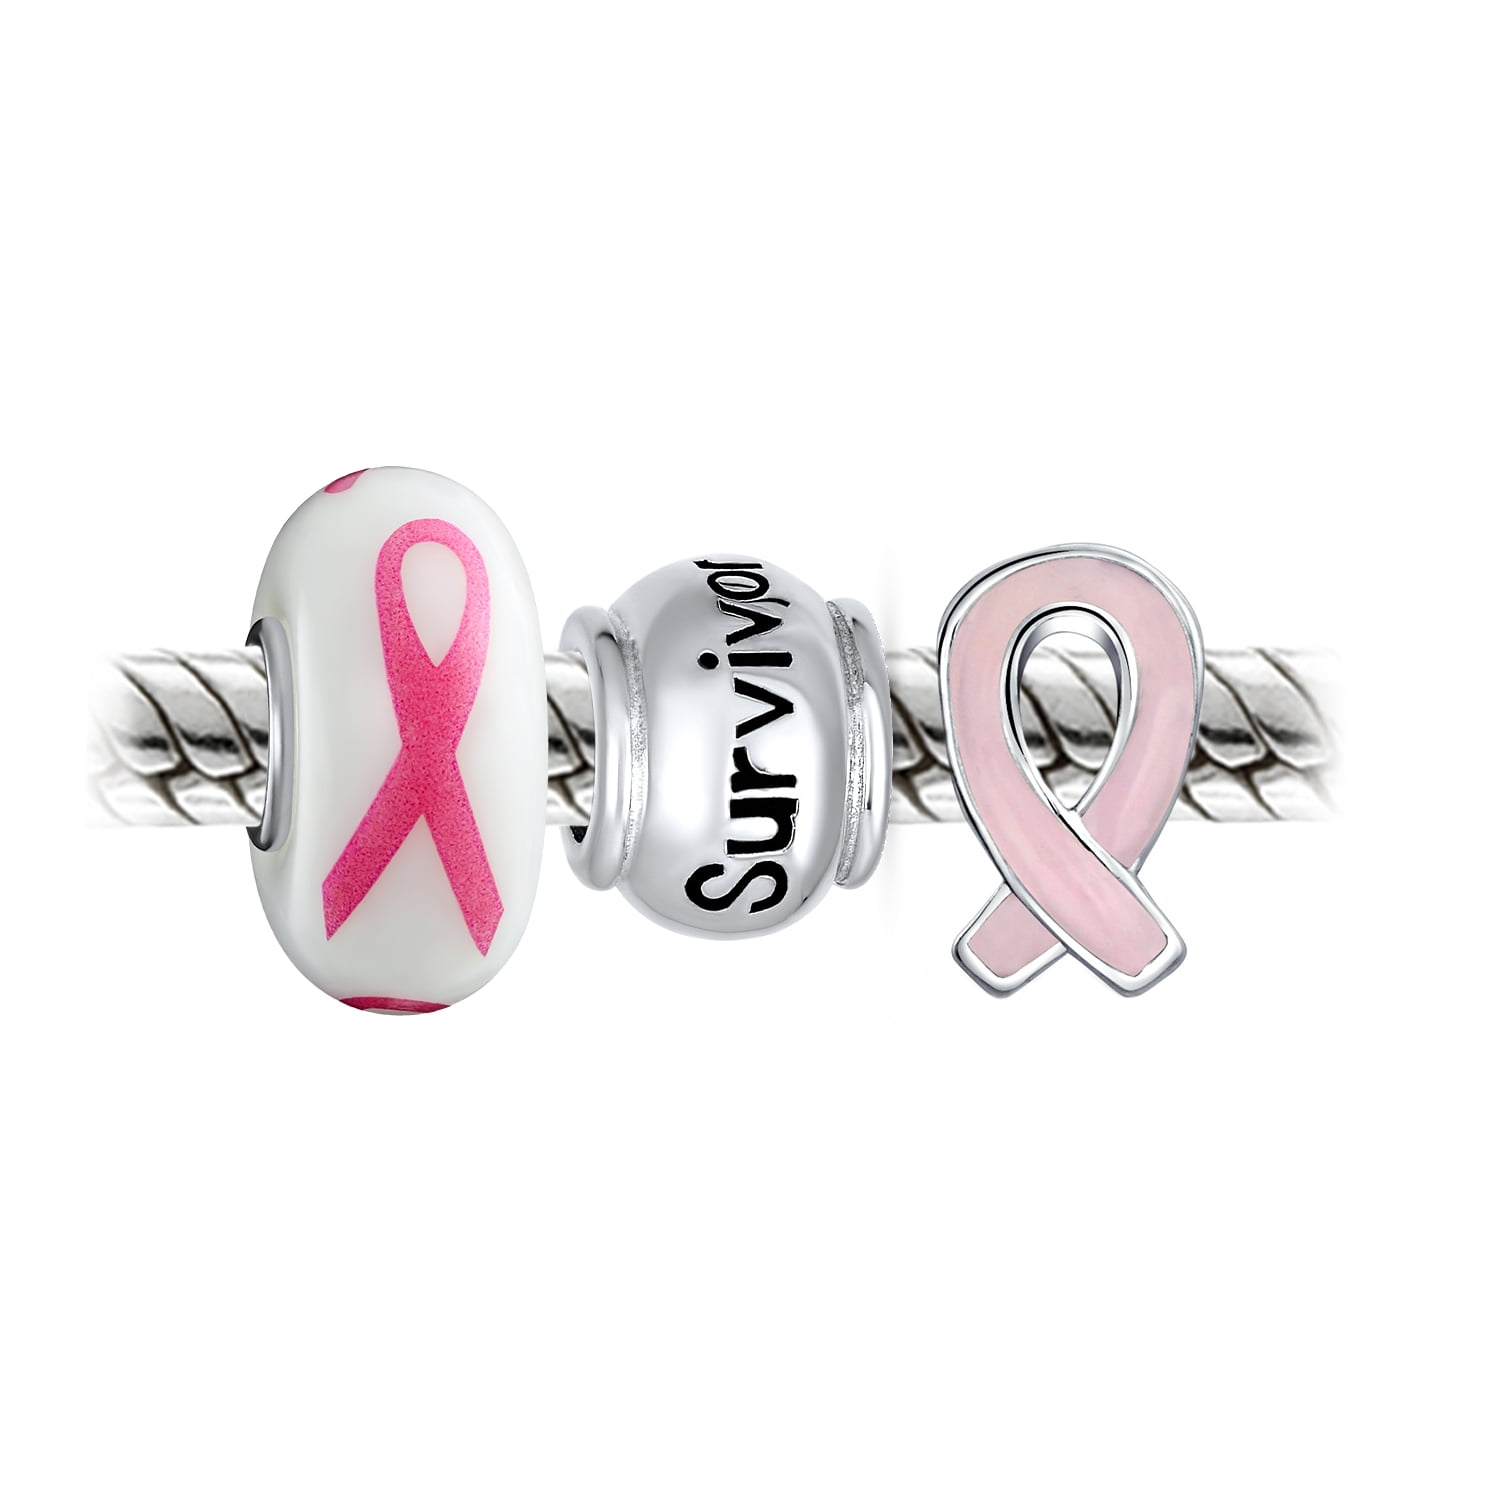 Awareness Bracelet, Charms or CHOOSE, Pandora or Non Pandora Bracelet, Both  With, Non Branded Beads & Charms,pink Ribbon 